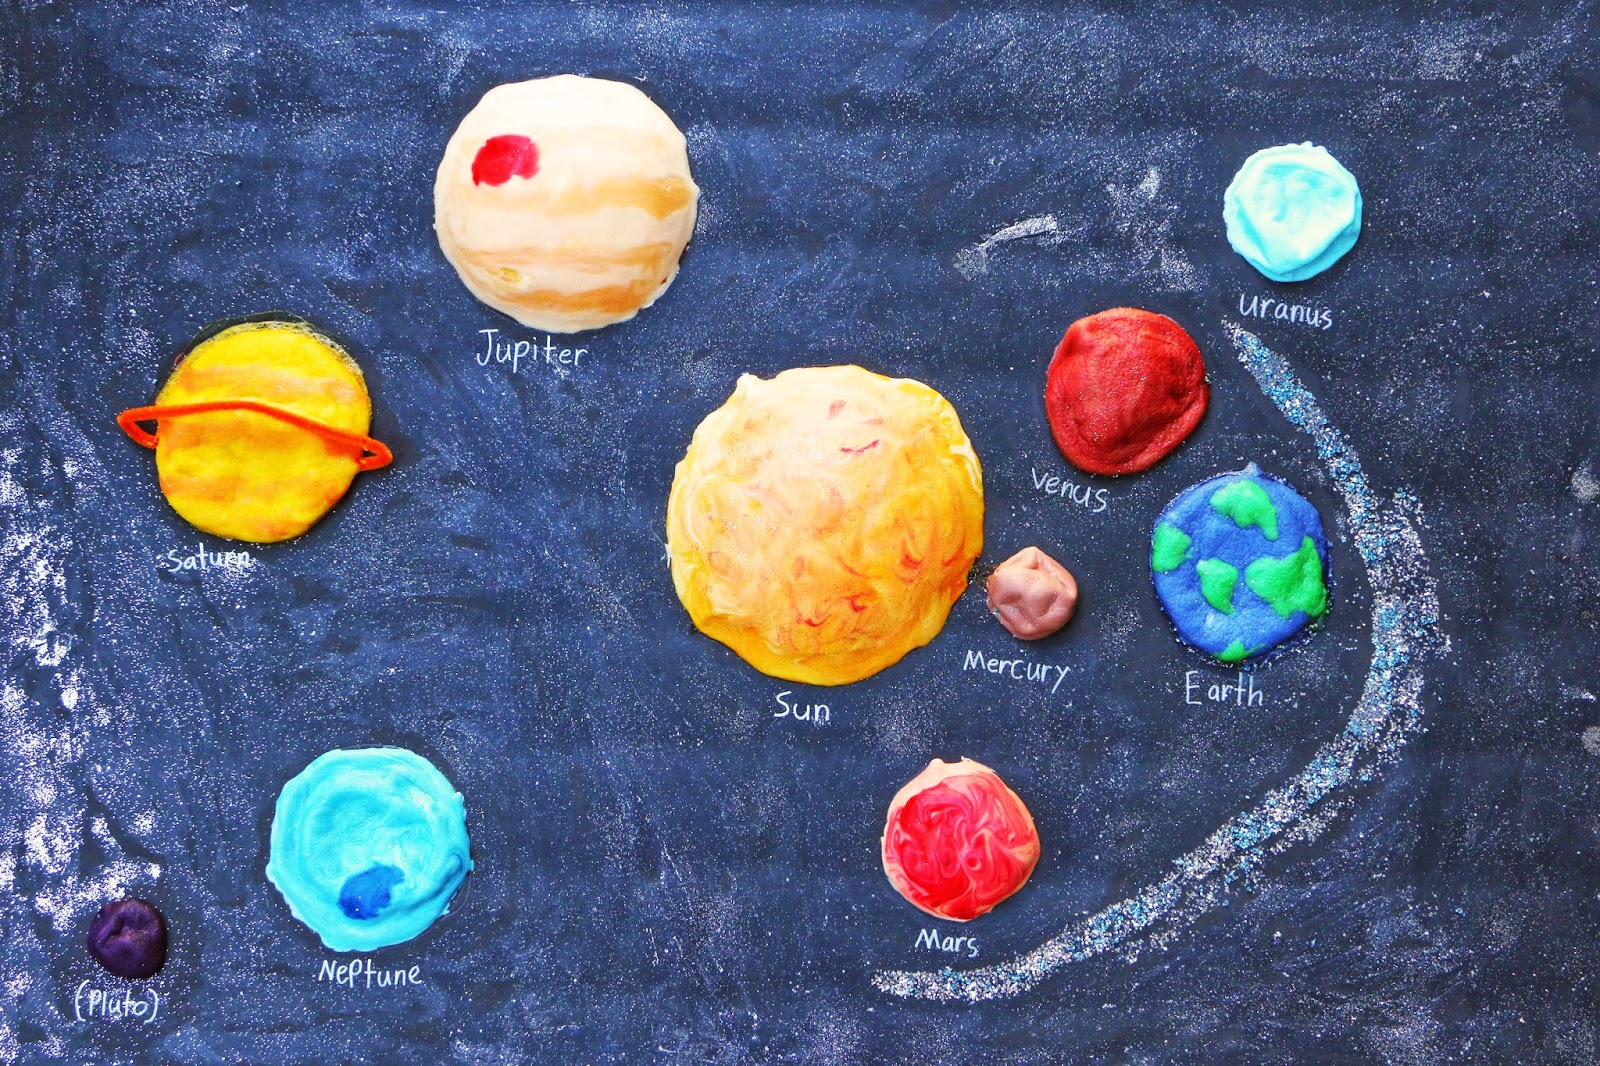 Make Your Own Solar System Mobile 2448 · 3264